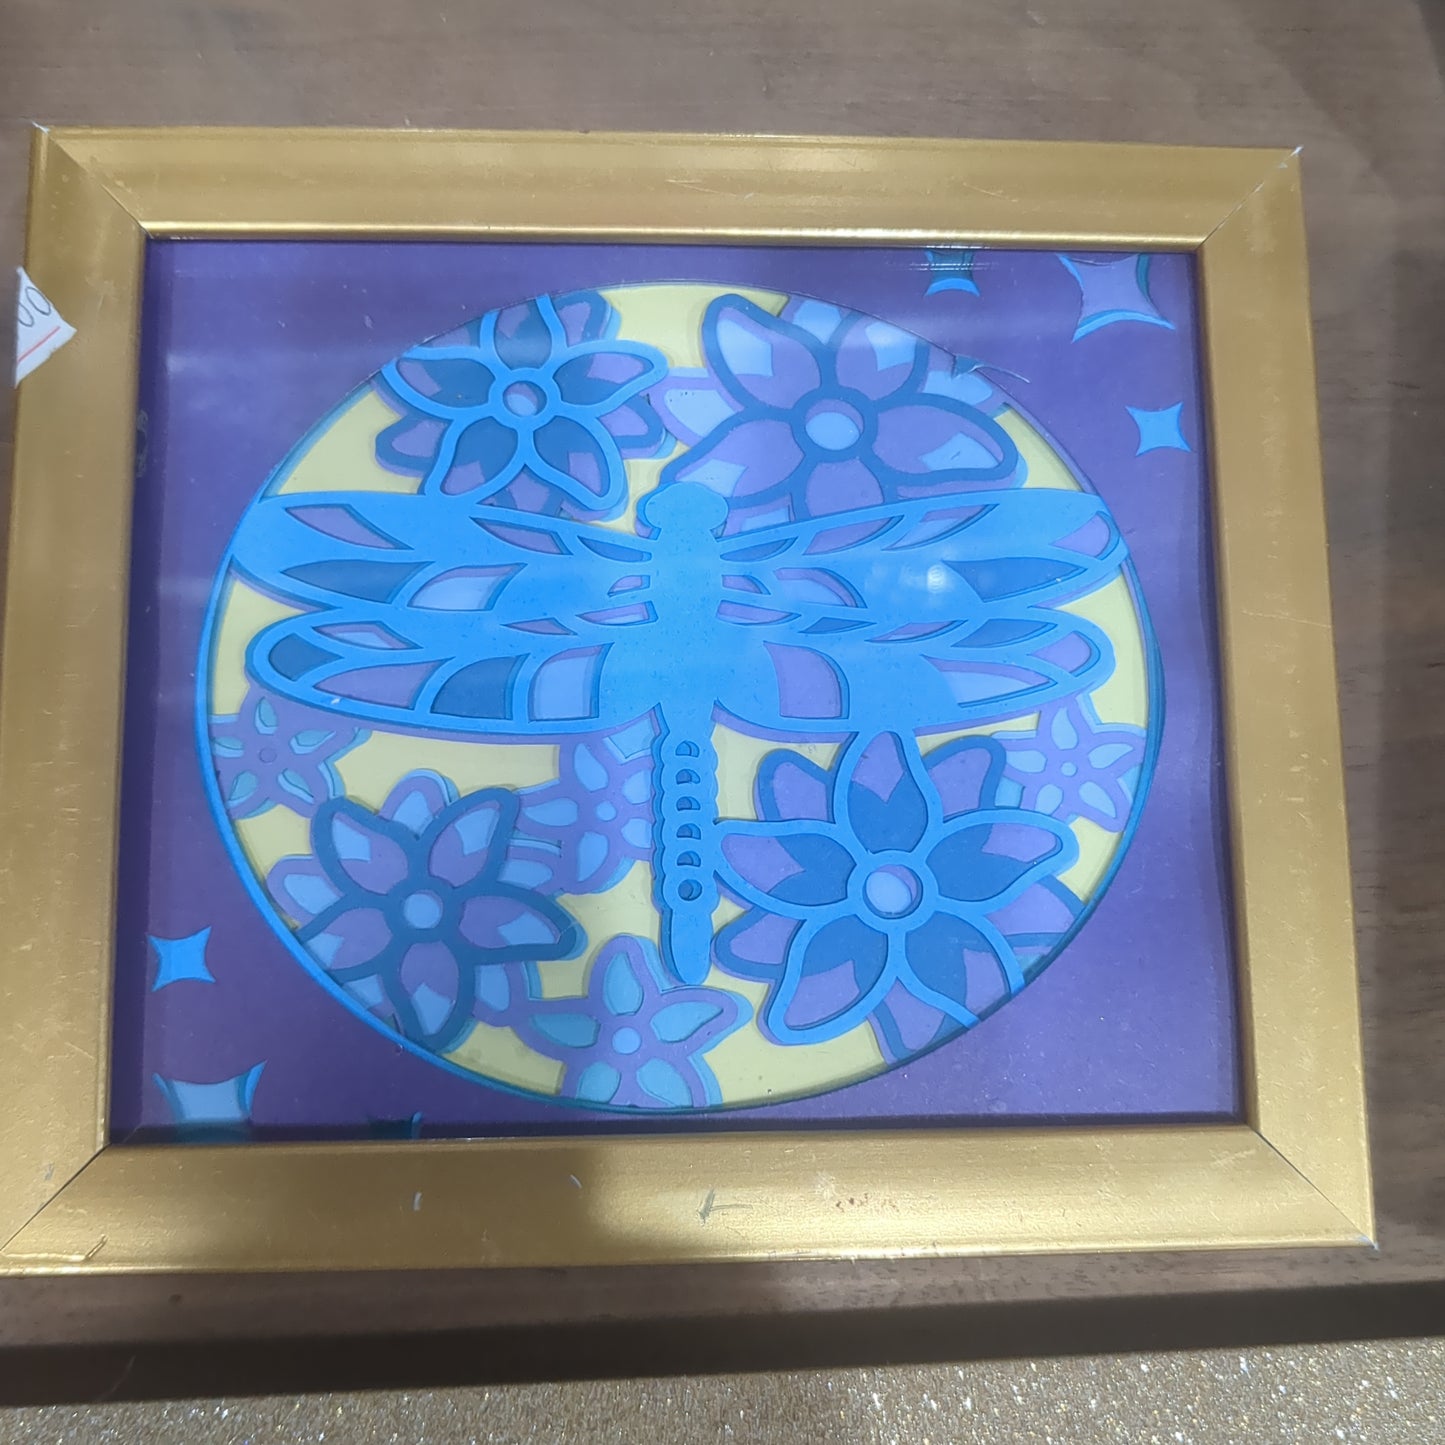 Roughly 5 by 6 inch gold shadow box with paper cut dragonfly